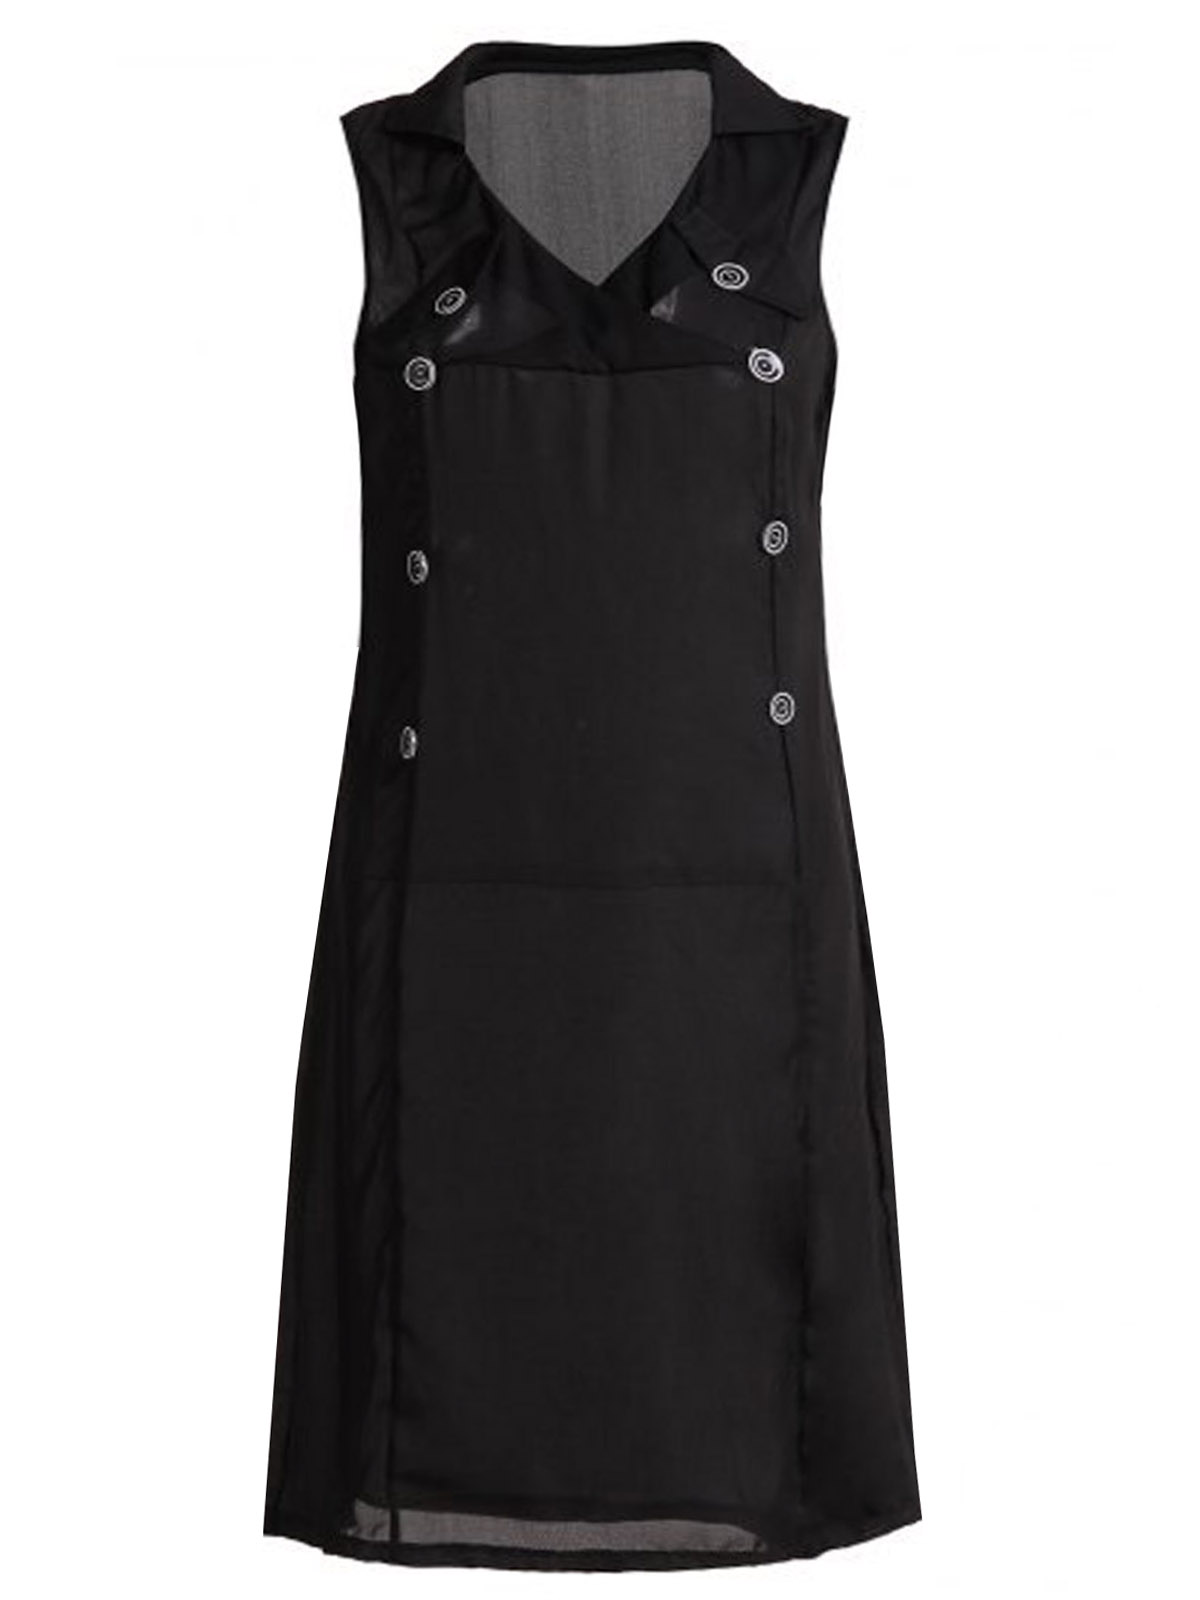 BLACK Double Breasted Collared Shift Dress - Size 36 to 42